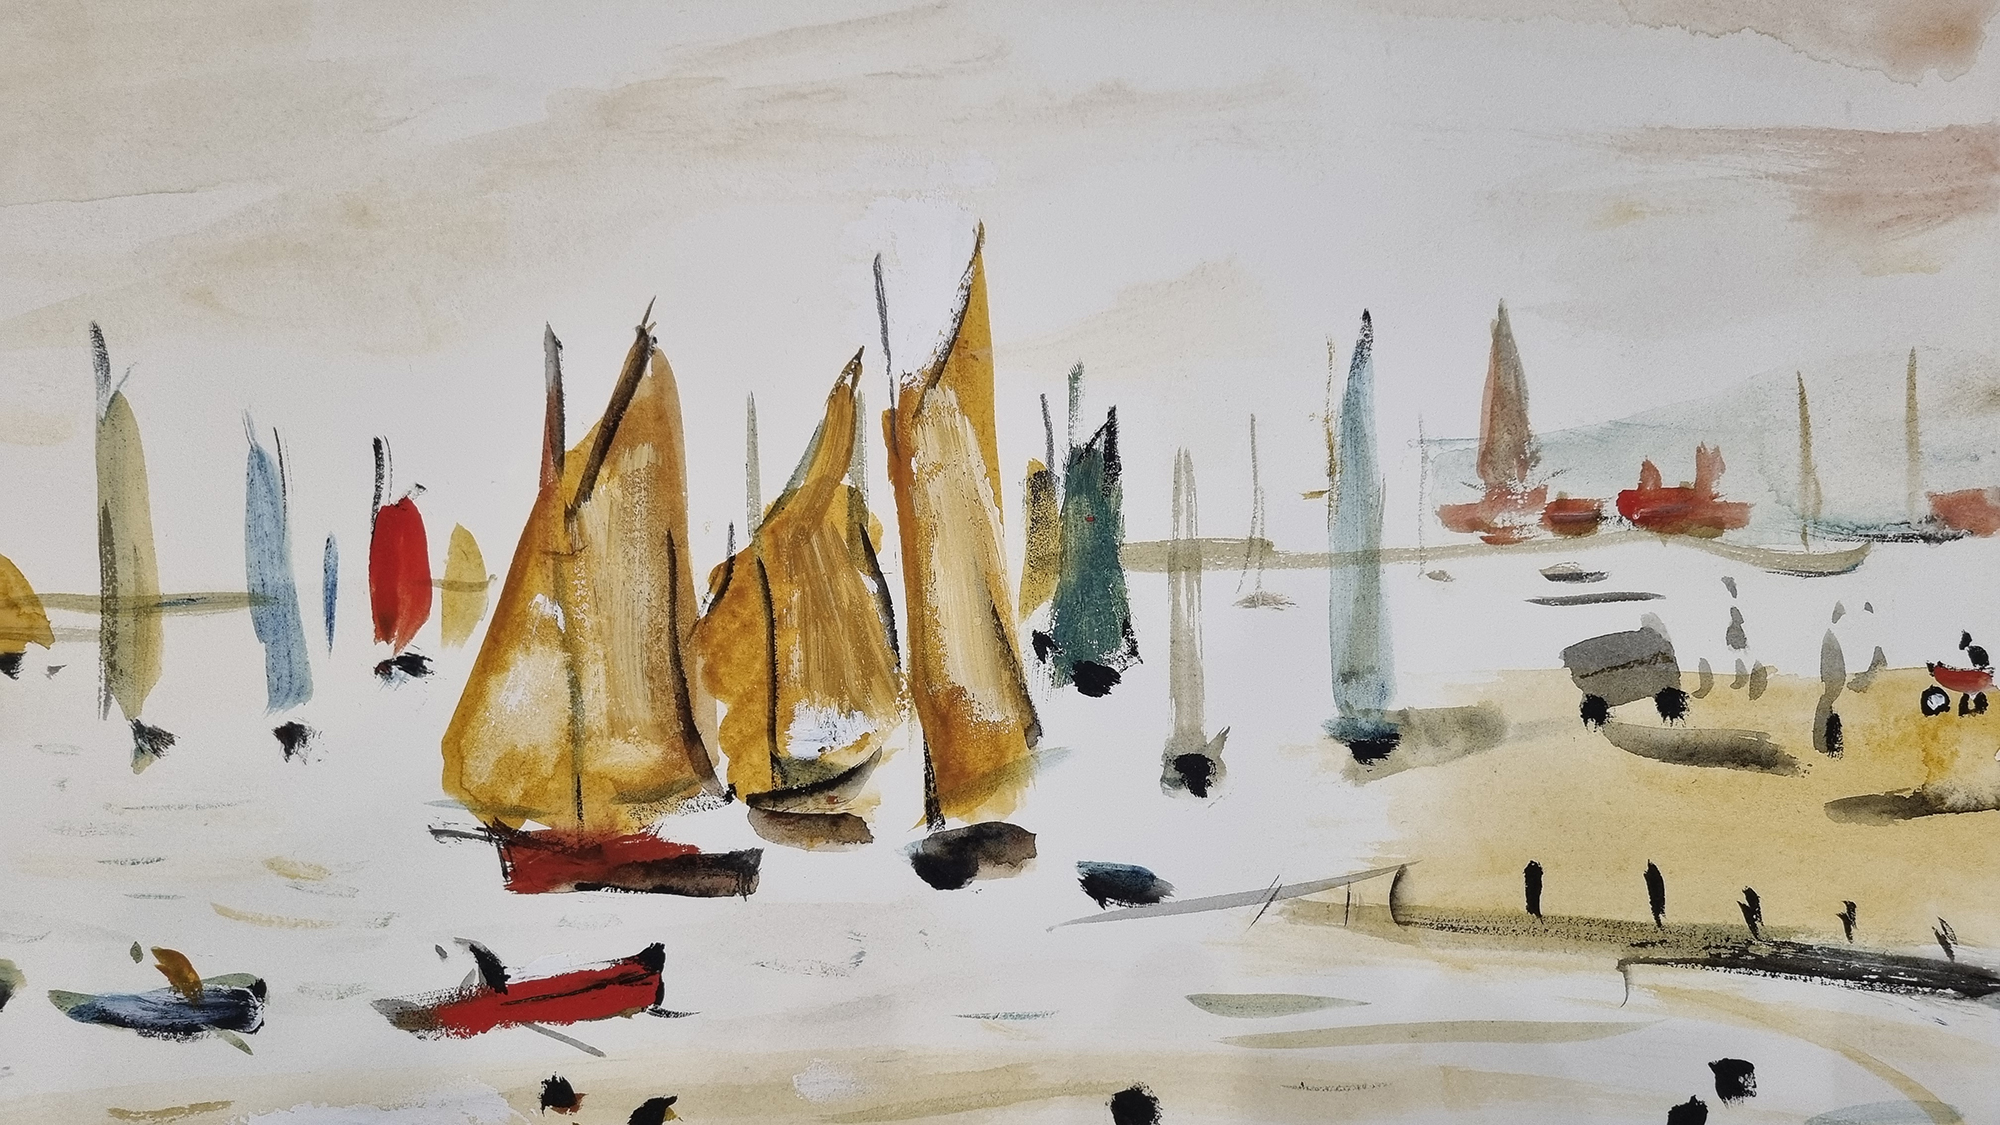 Limited Edition by L.S. Lowry "Yachts, 1959" with Certificate. - Image 5 of 6